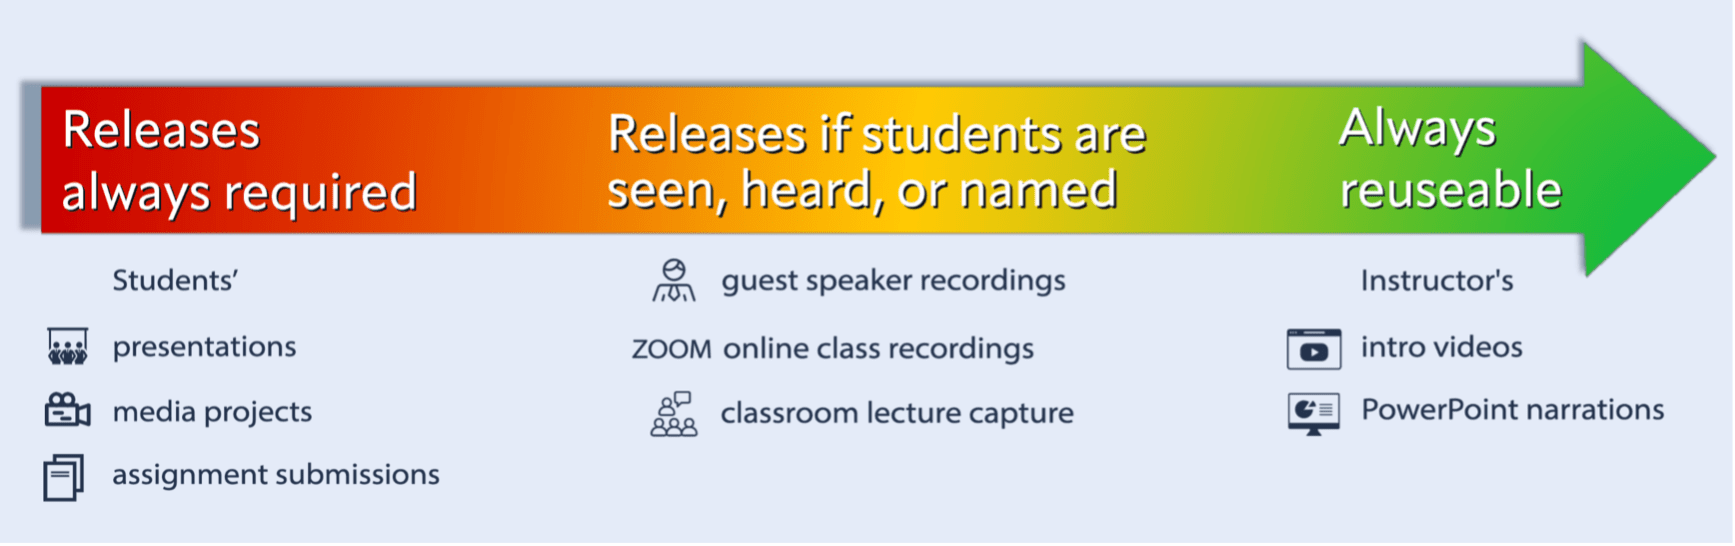 Infographic describing when classroom artifacts are reusable. Releases always required for reuse of student's presentations, media projects and assignment submissions. If students are seen, heard or named in a guest speaker recording, online class Zoom recording or a classroom lecture capture, then releases are required for the media to be reused. Instructors intro videos and PowerPoint narrations are always reusable.